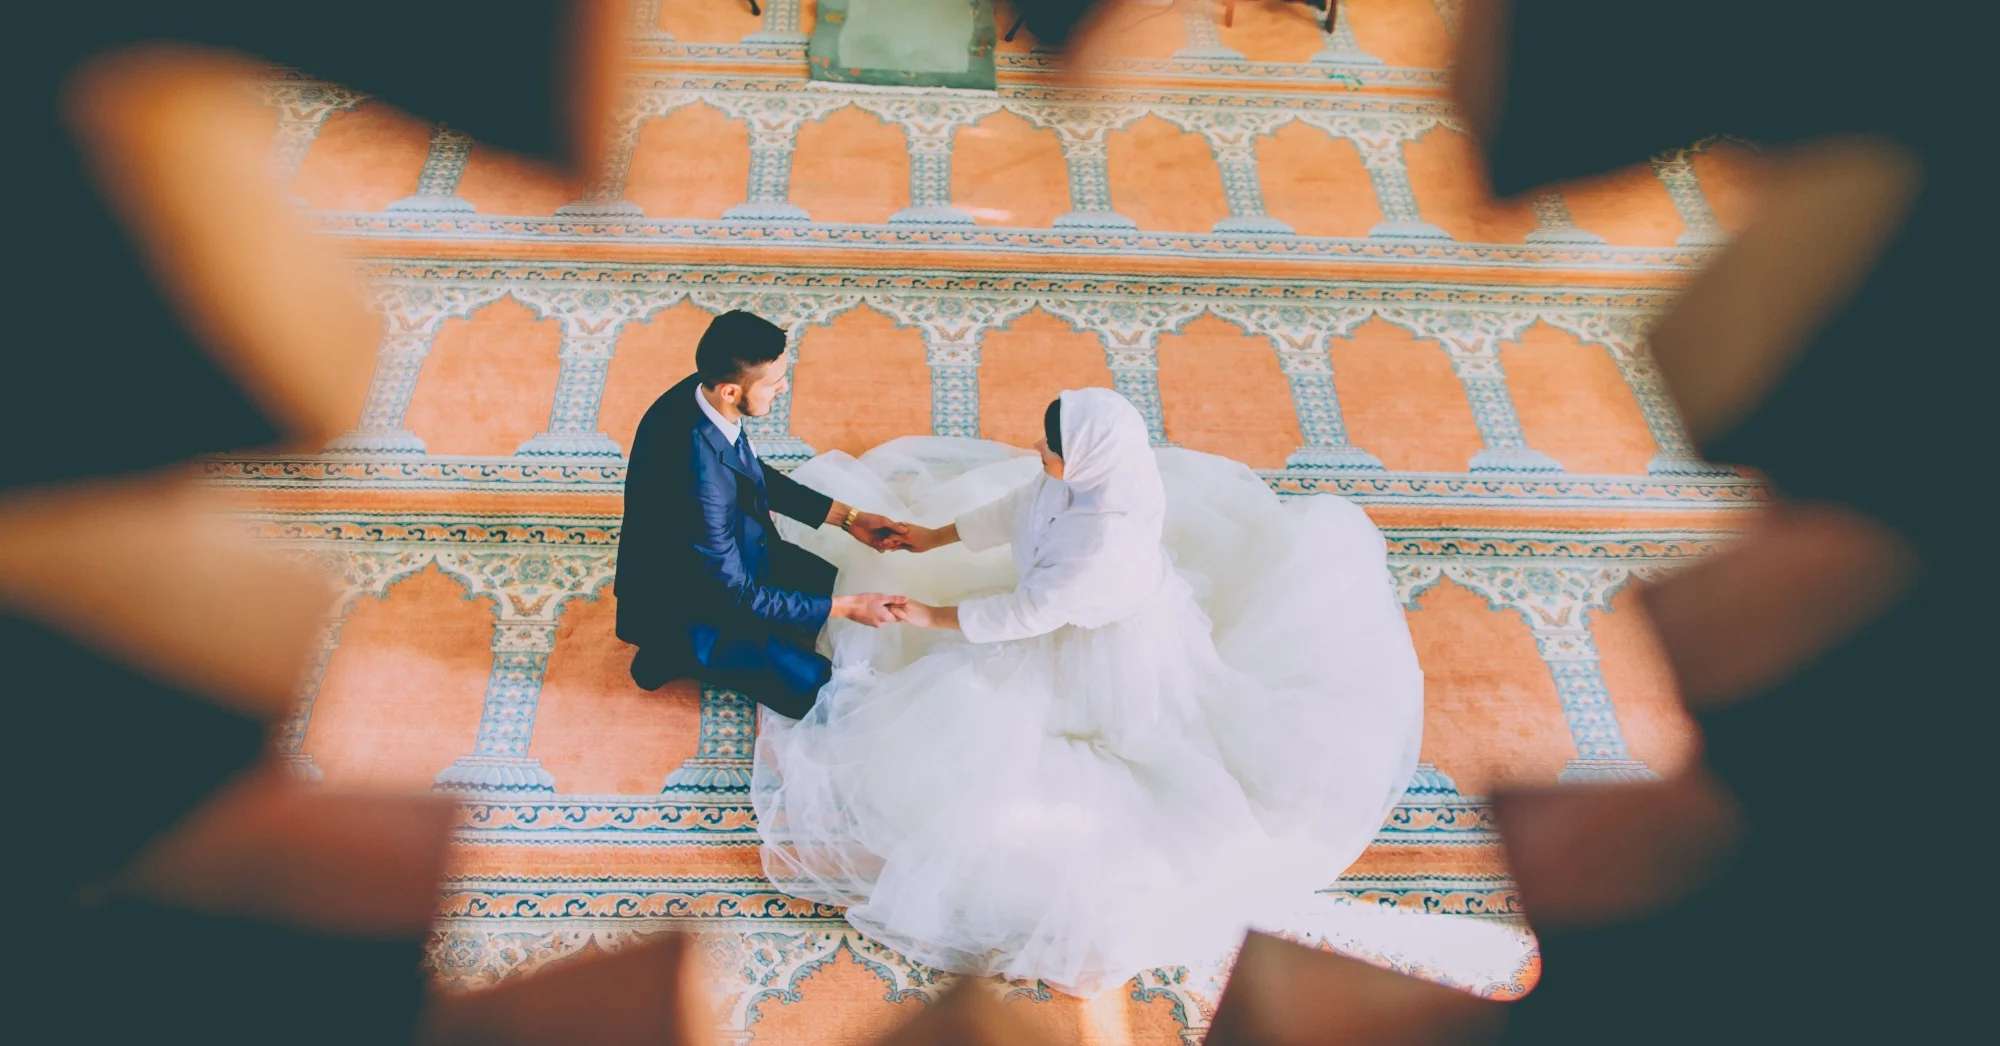 What The Hadiths Of The Prophet Muhammad Can Teach Us About Marriage